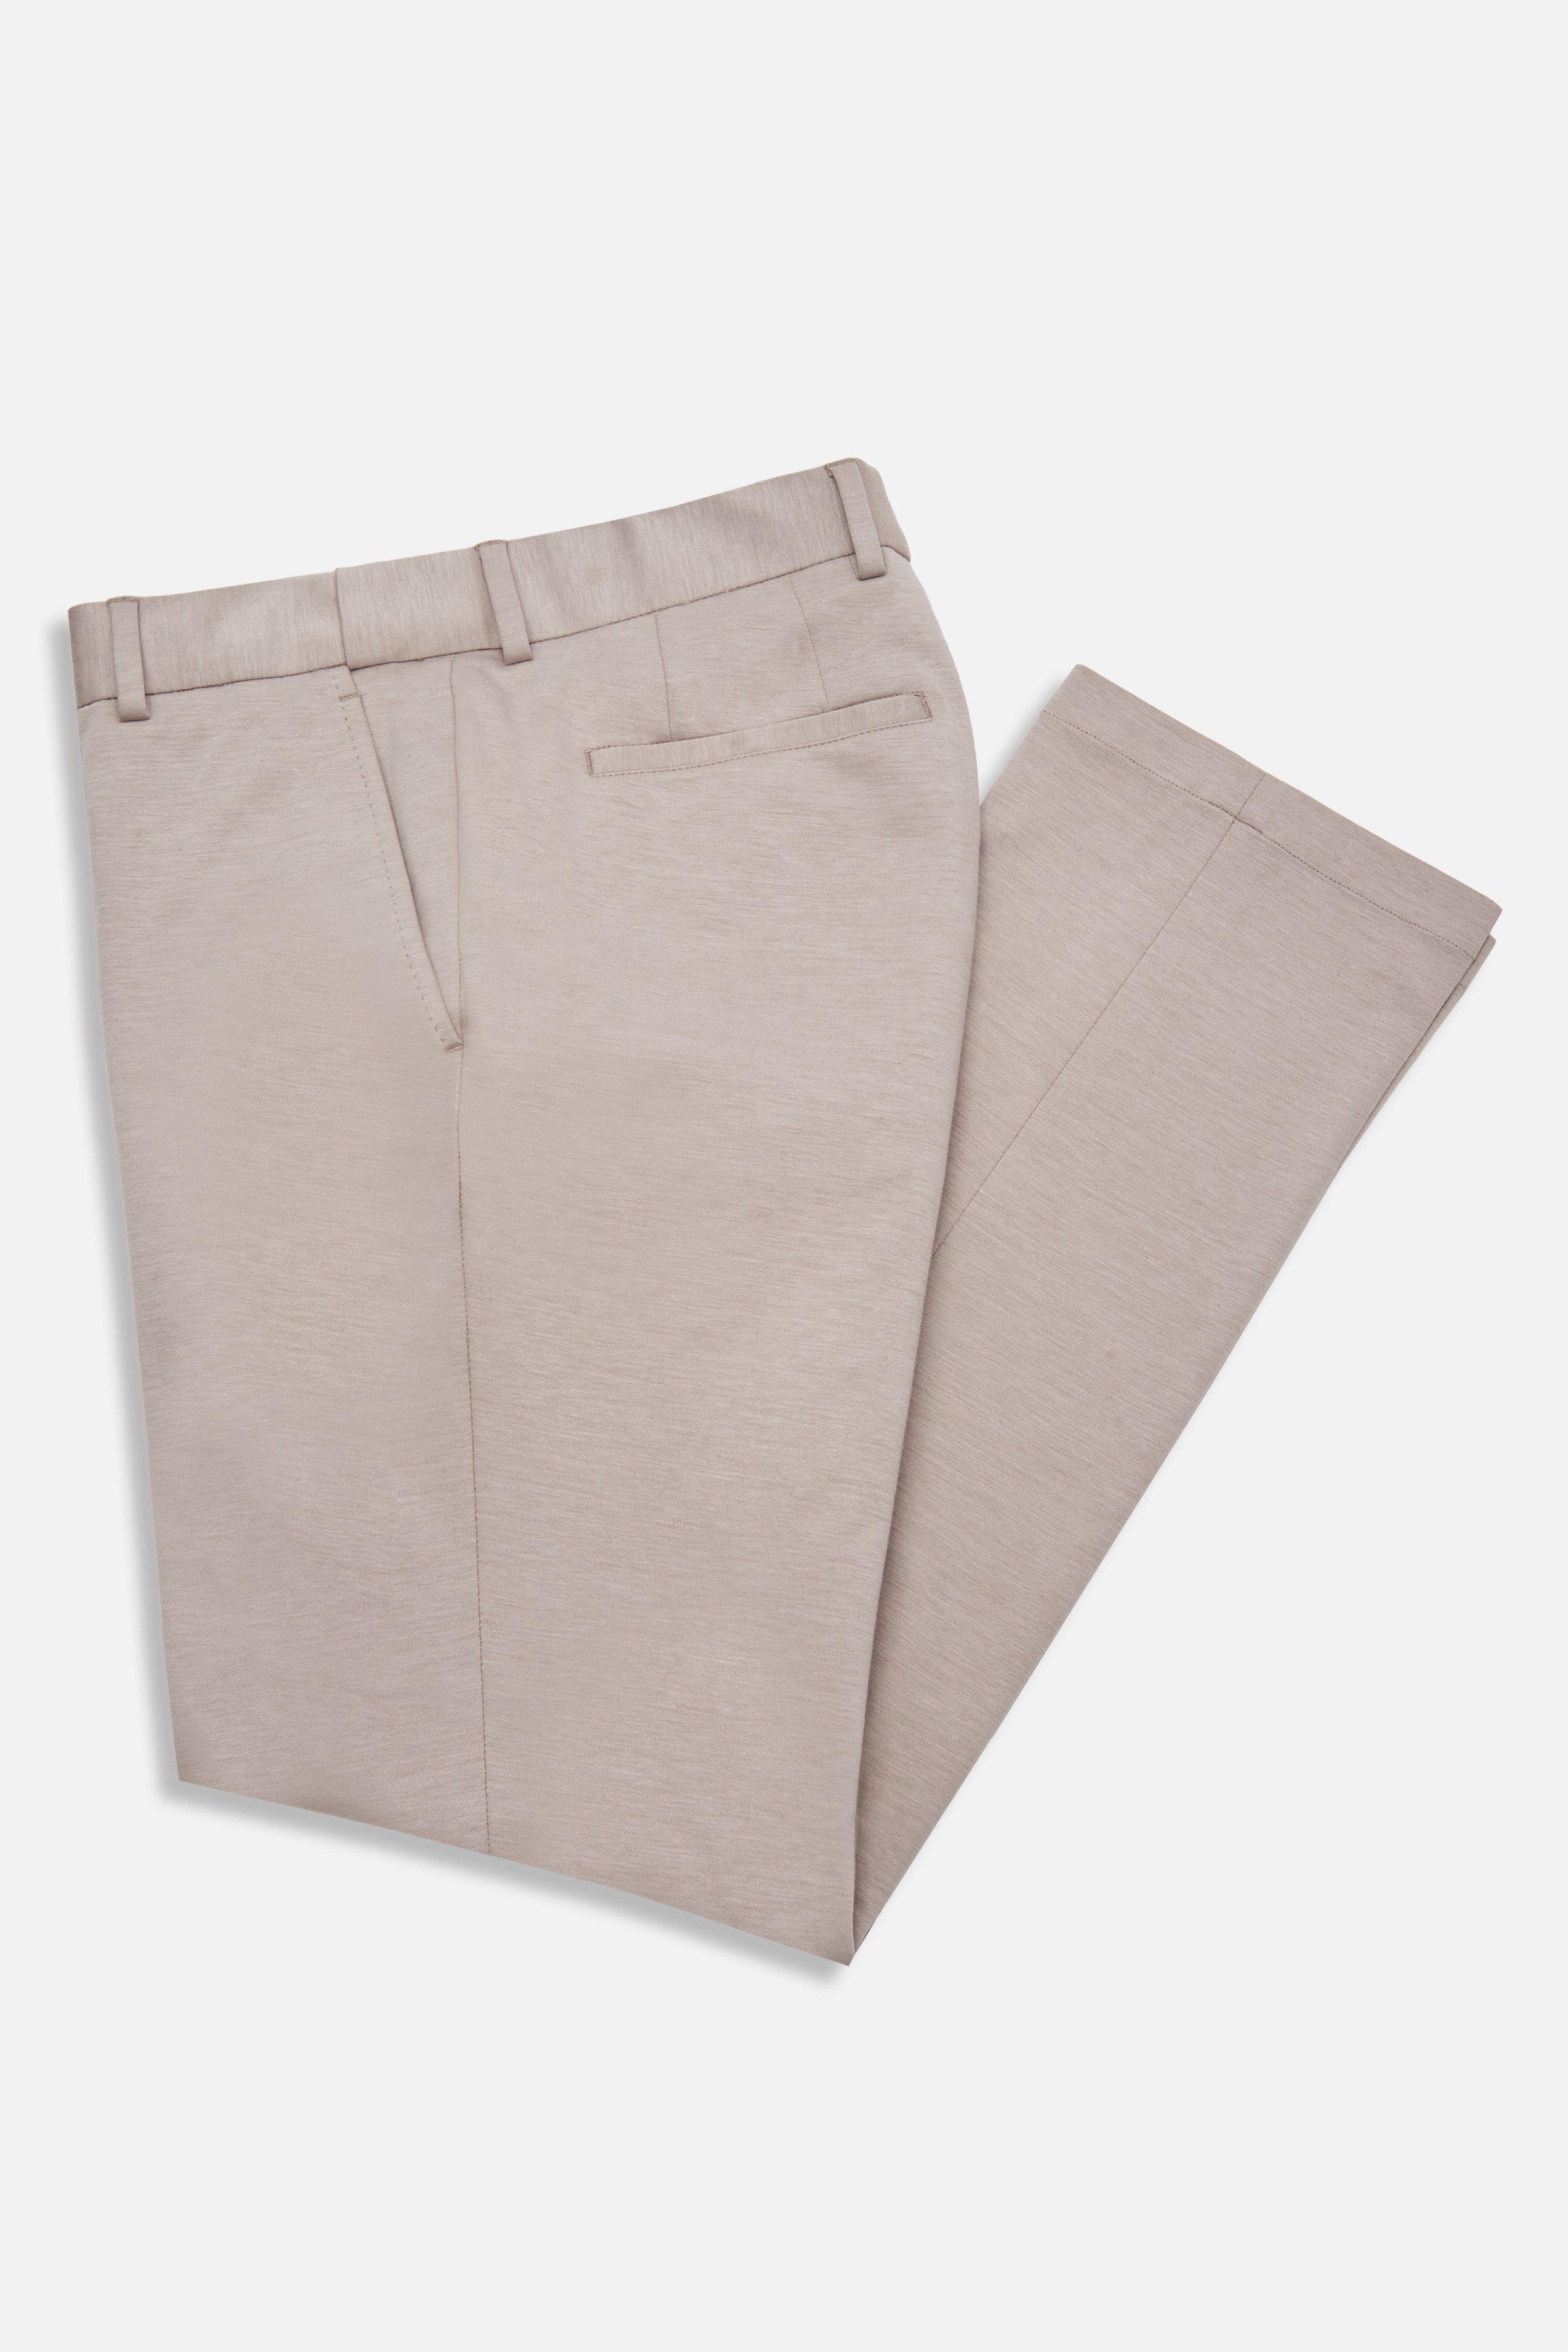 Knot Standard Beige Everyday Performance Pant by Knot Standard